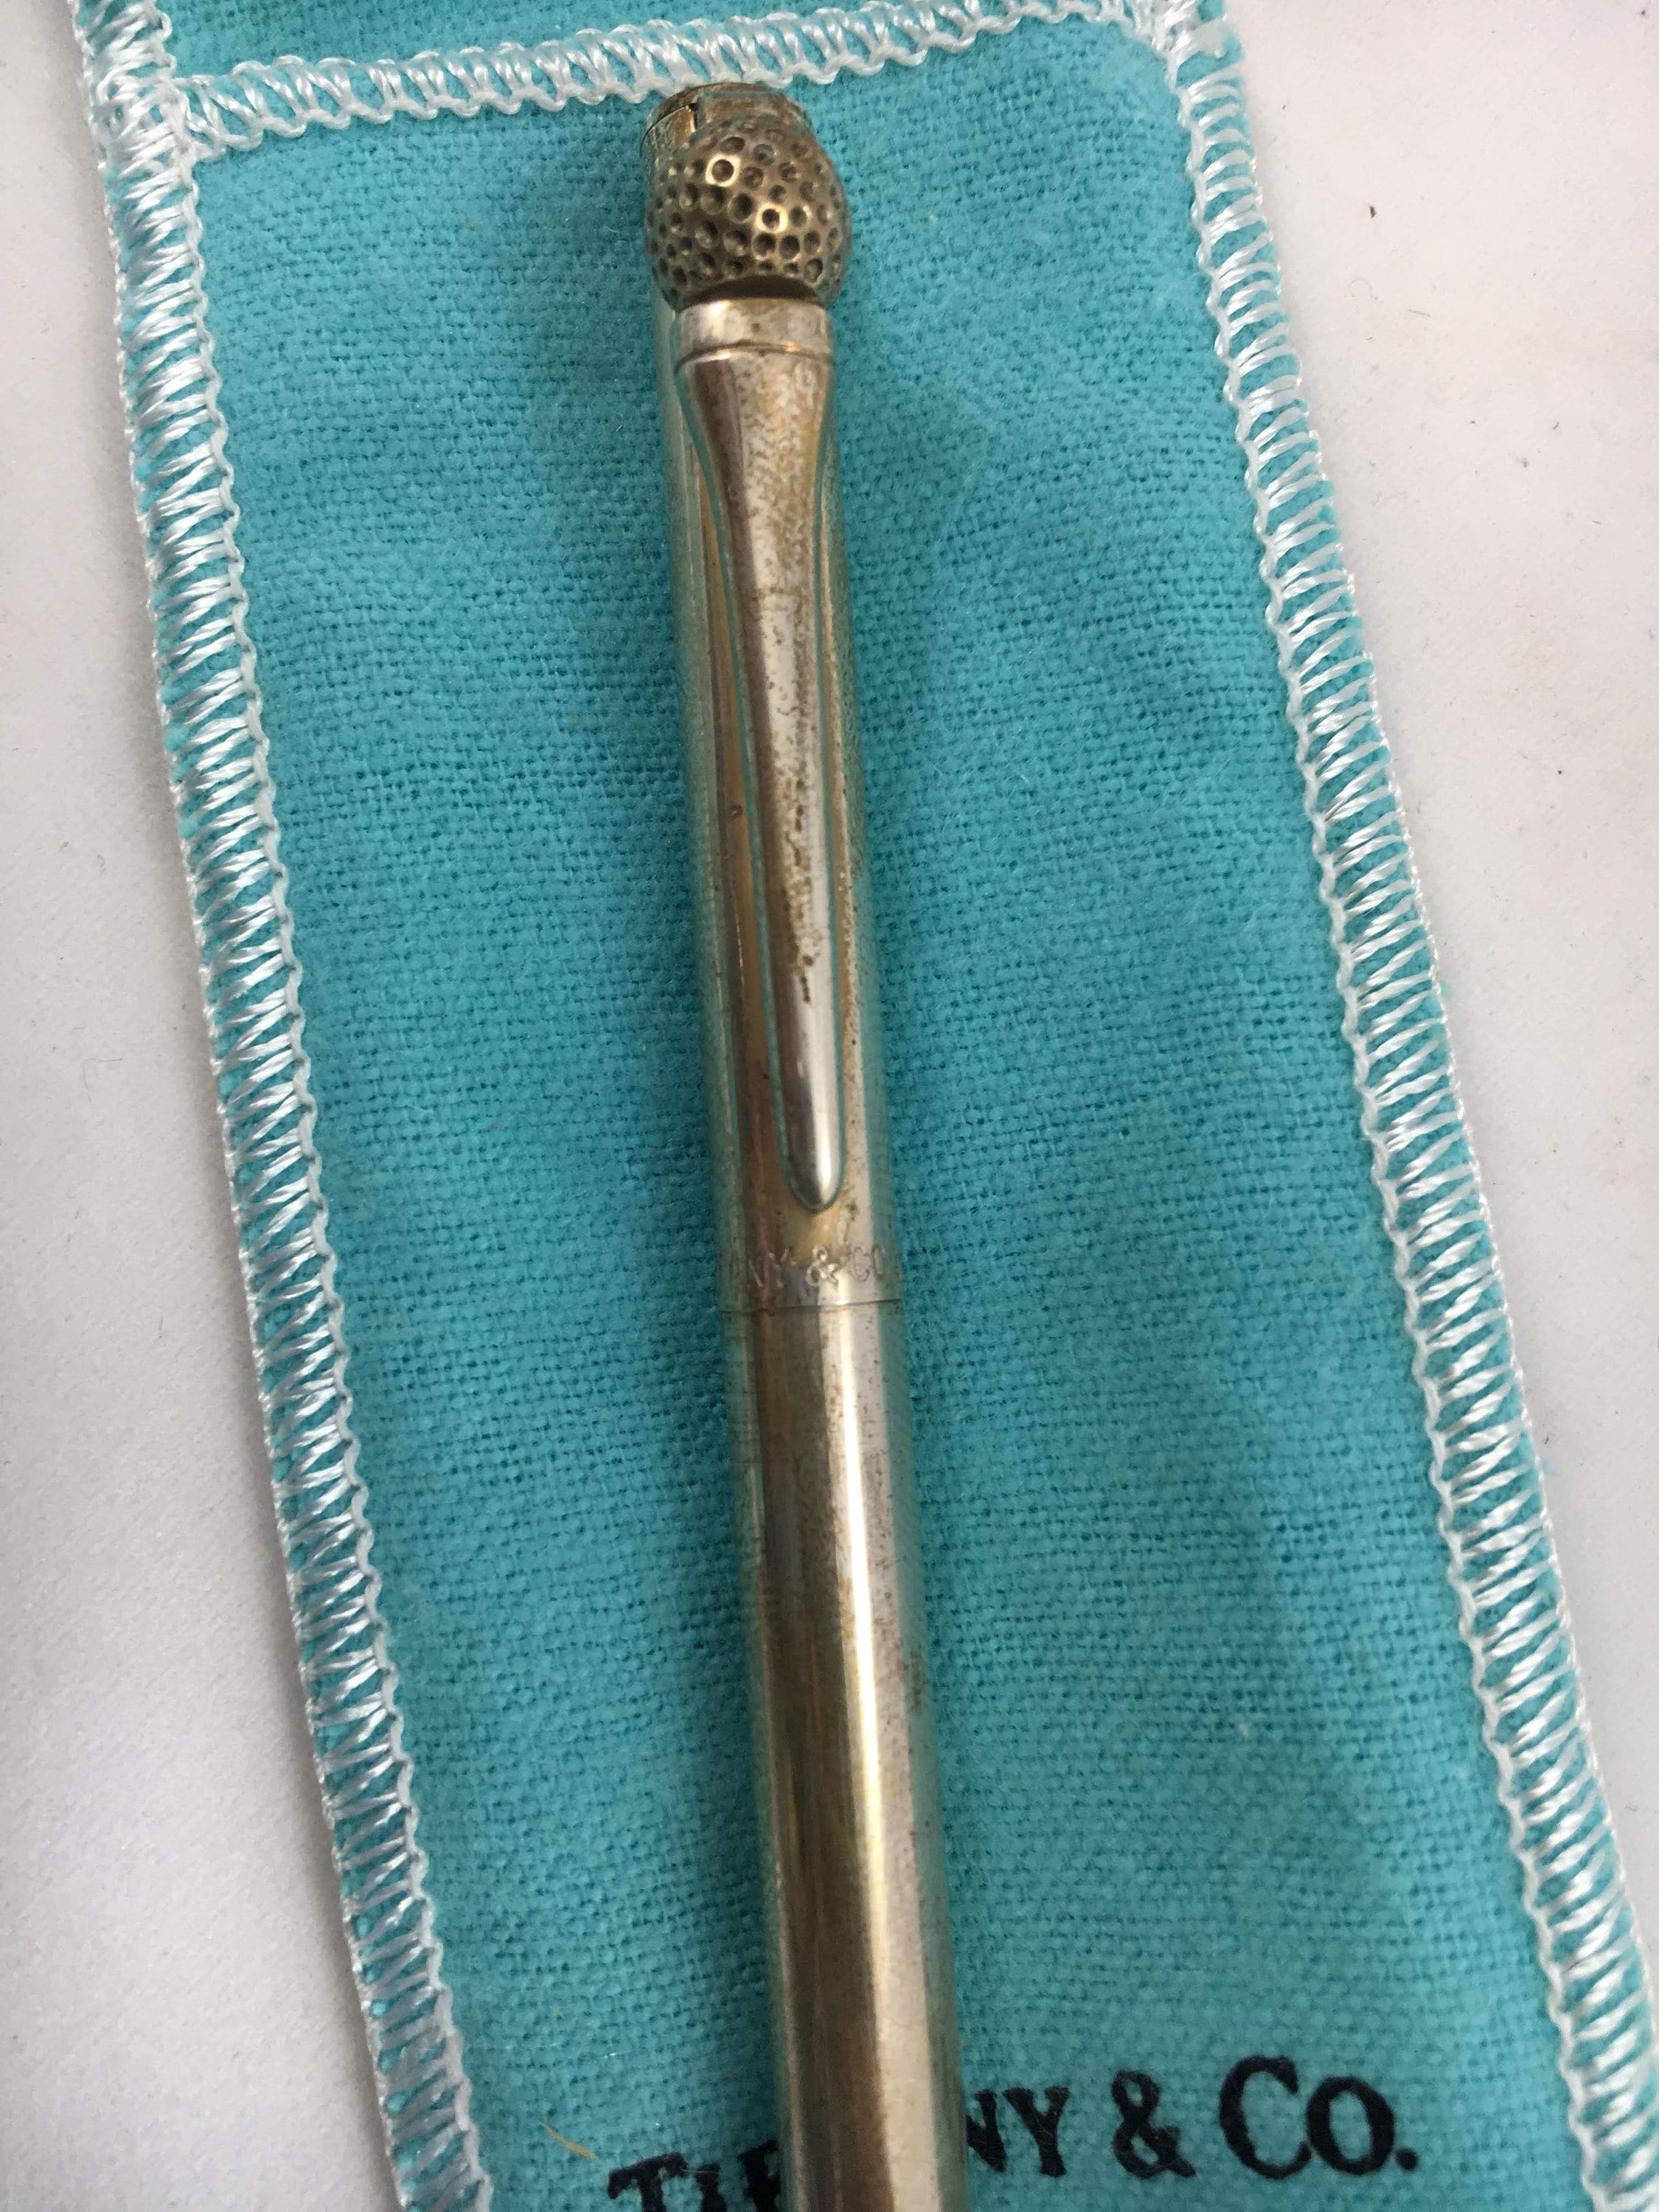 Tiffany & Co. sterling silver pen in original box and felt pouch